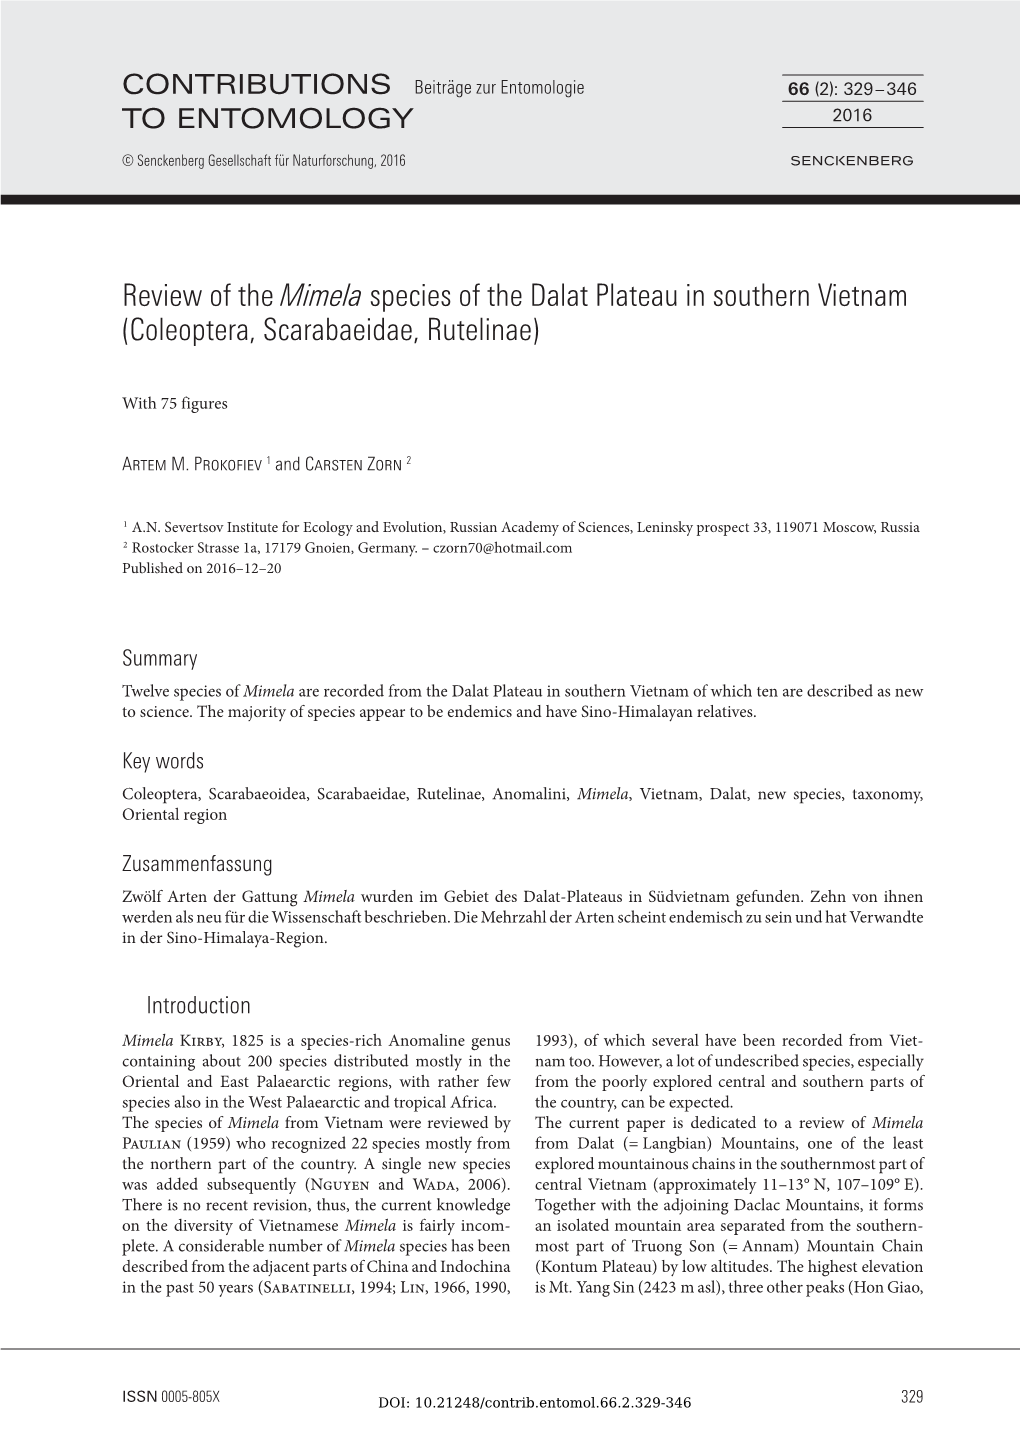 Review of the Mimela Species of the Dalat Plateau in Southern Vietnam (Coleoptera, Scarabaeidae, Rutelinae)